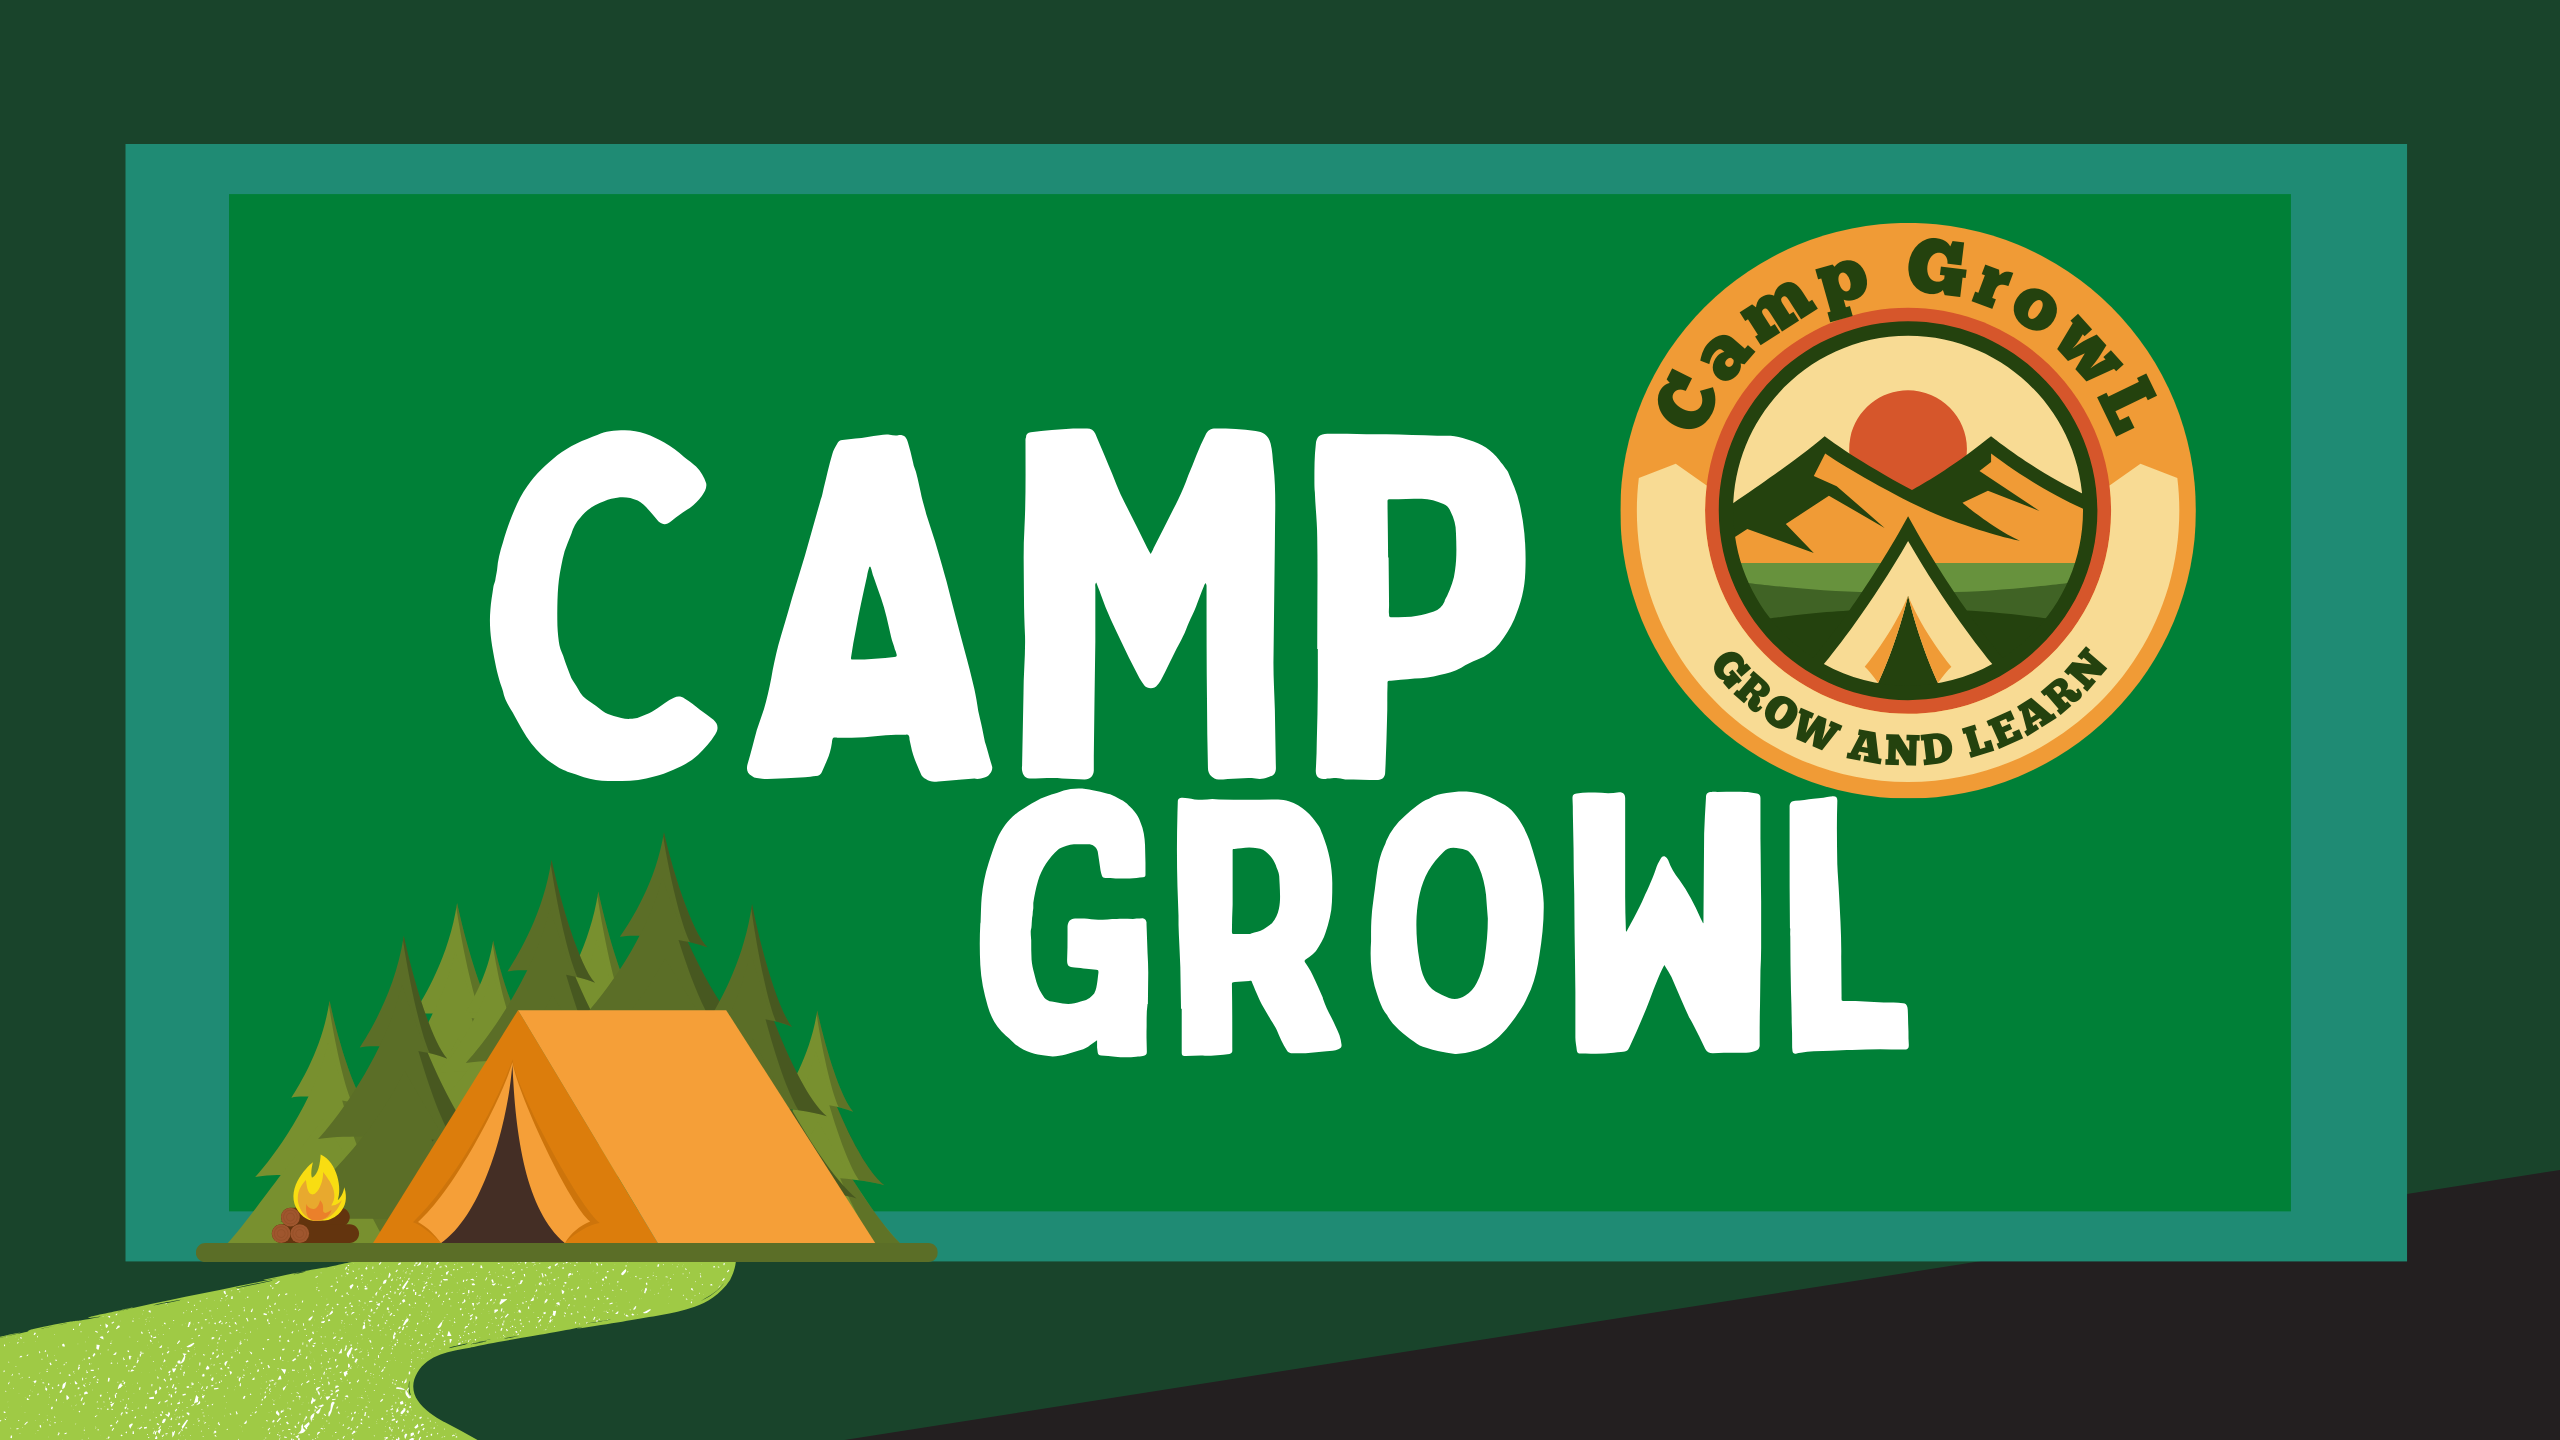 Green background, white lettering, tent image